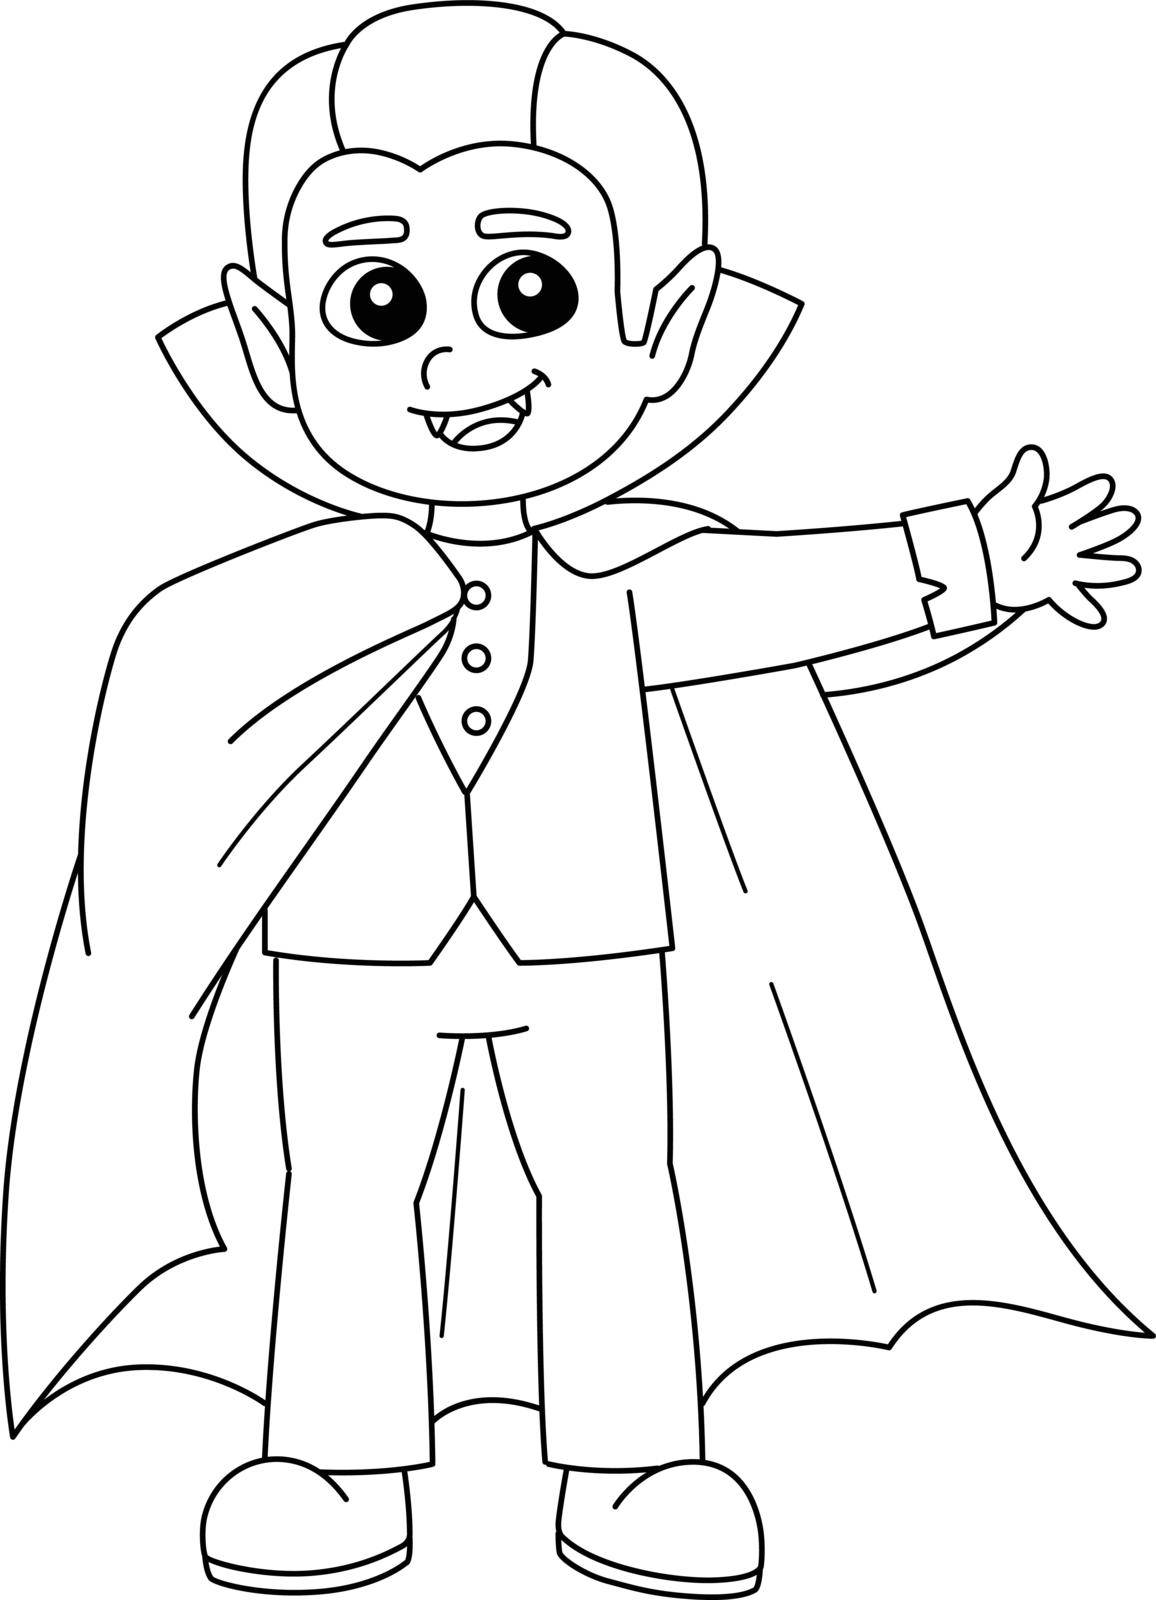 A cute and funny coloring page of a vampire Halloween. Provides hours of coloring fun for children. To color, this page is very easy. Suitable for little kids and toddlers.